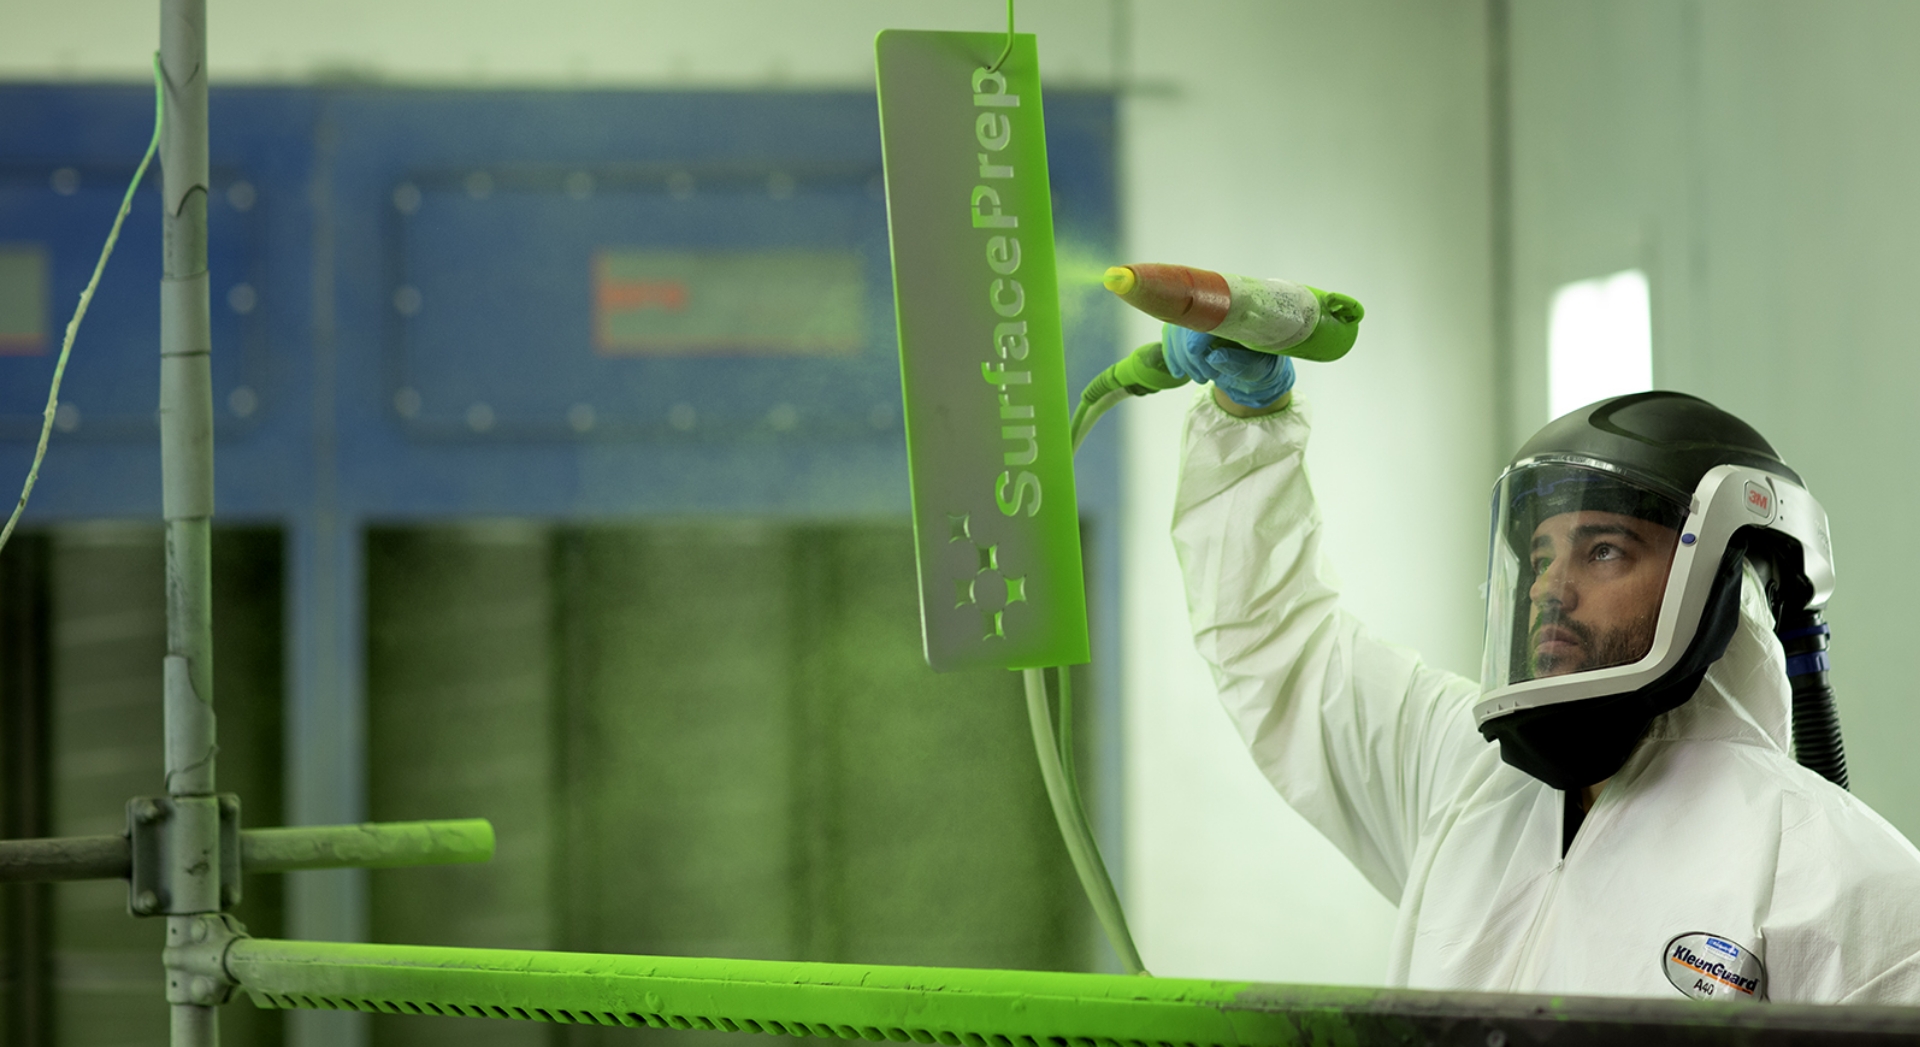 SurfacePrep Hero Photo; man in full safety suit spray painting a piece of metal with the the SurfacePrep emblem green.